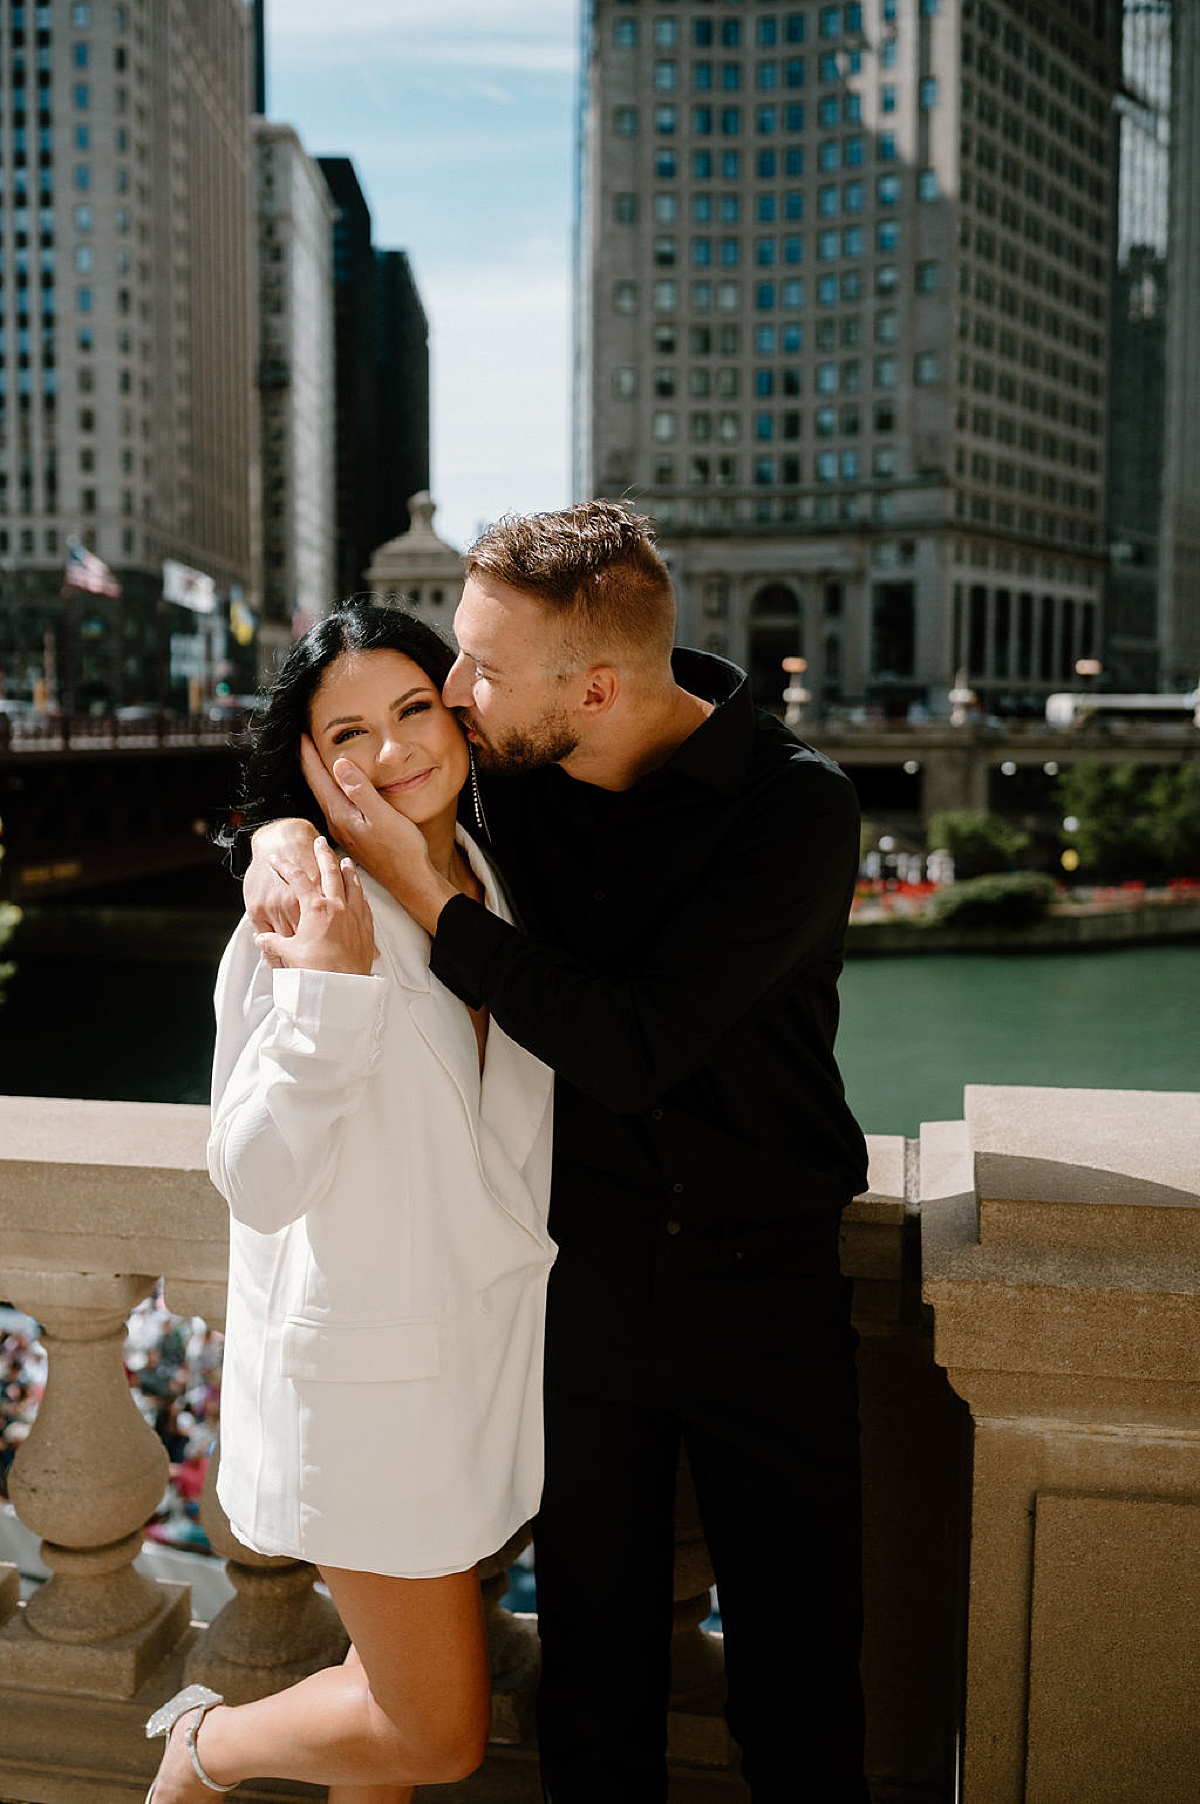 cute couple pose on bridge while he kisses her cheek during big city engagement session